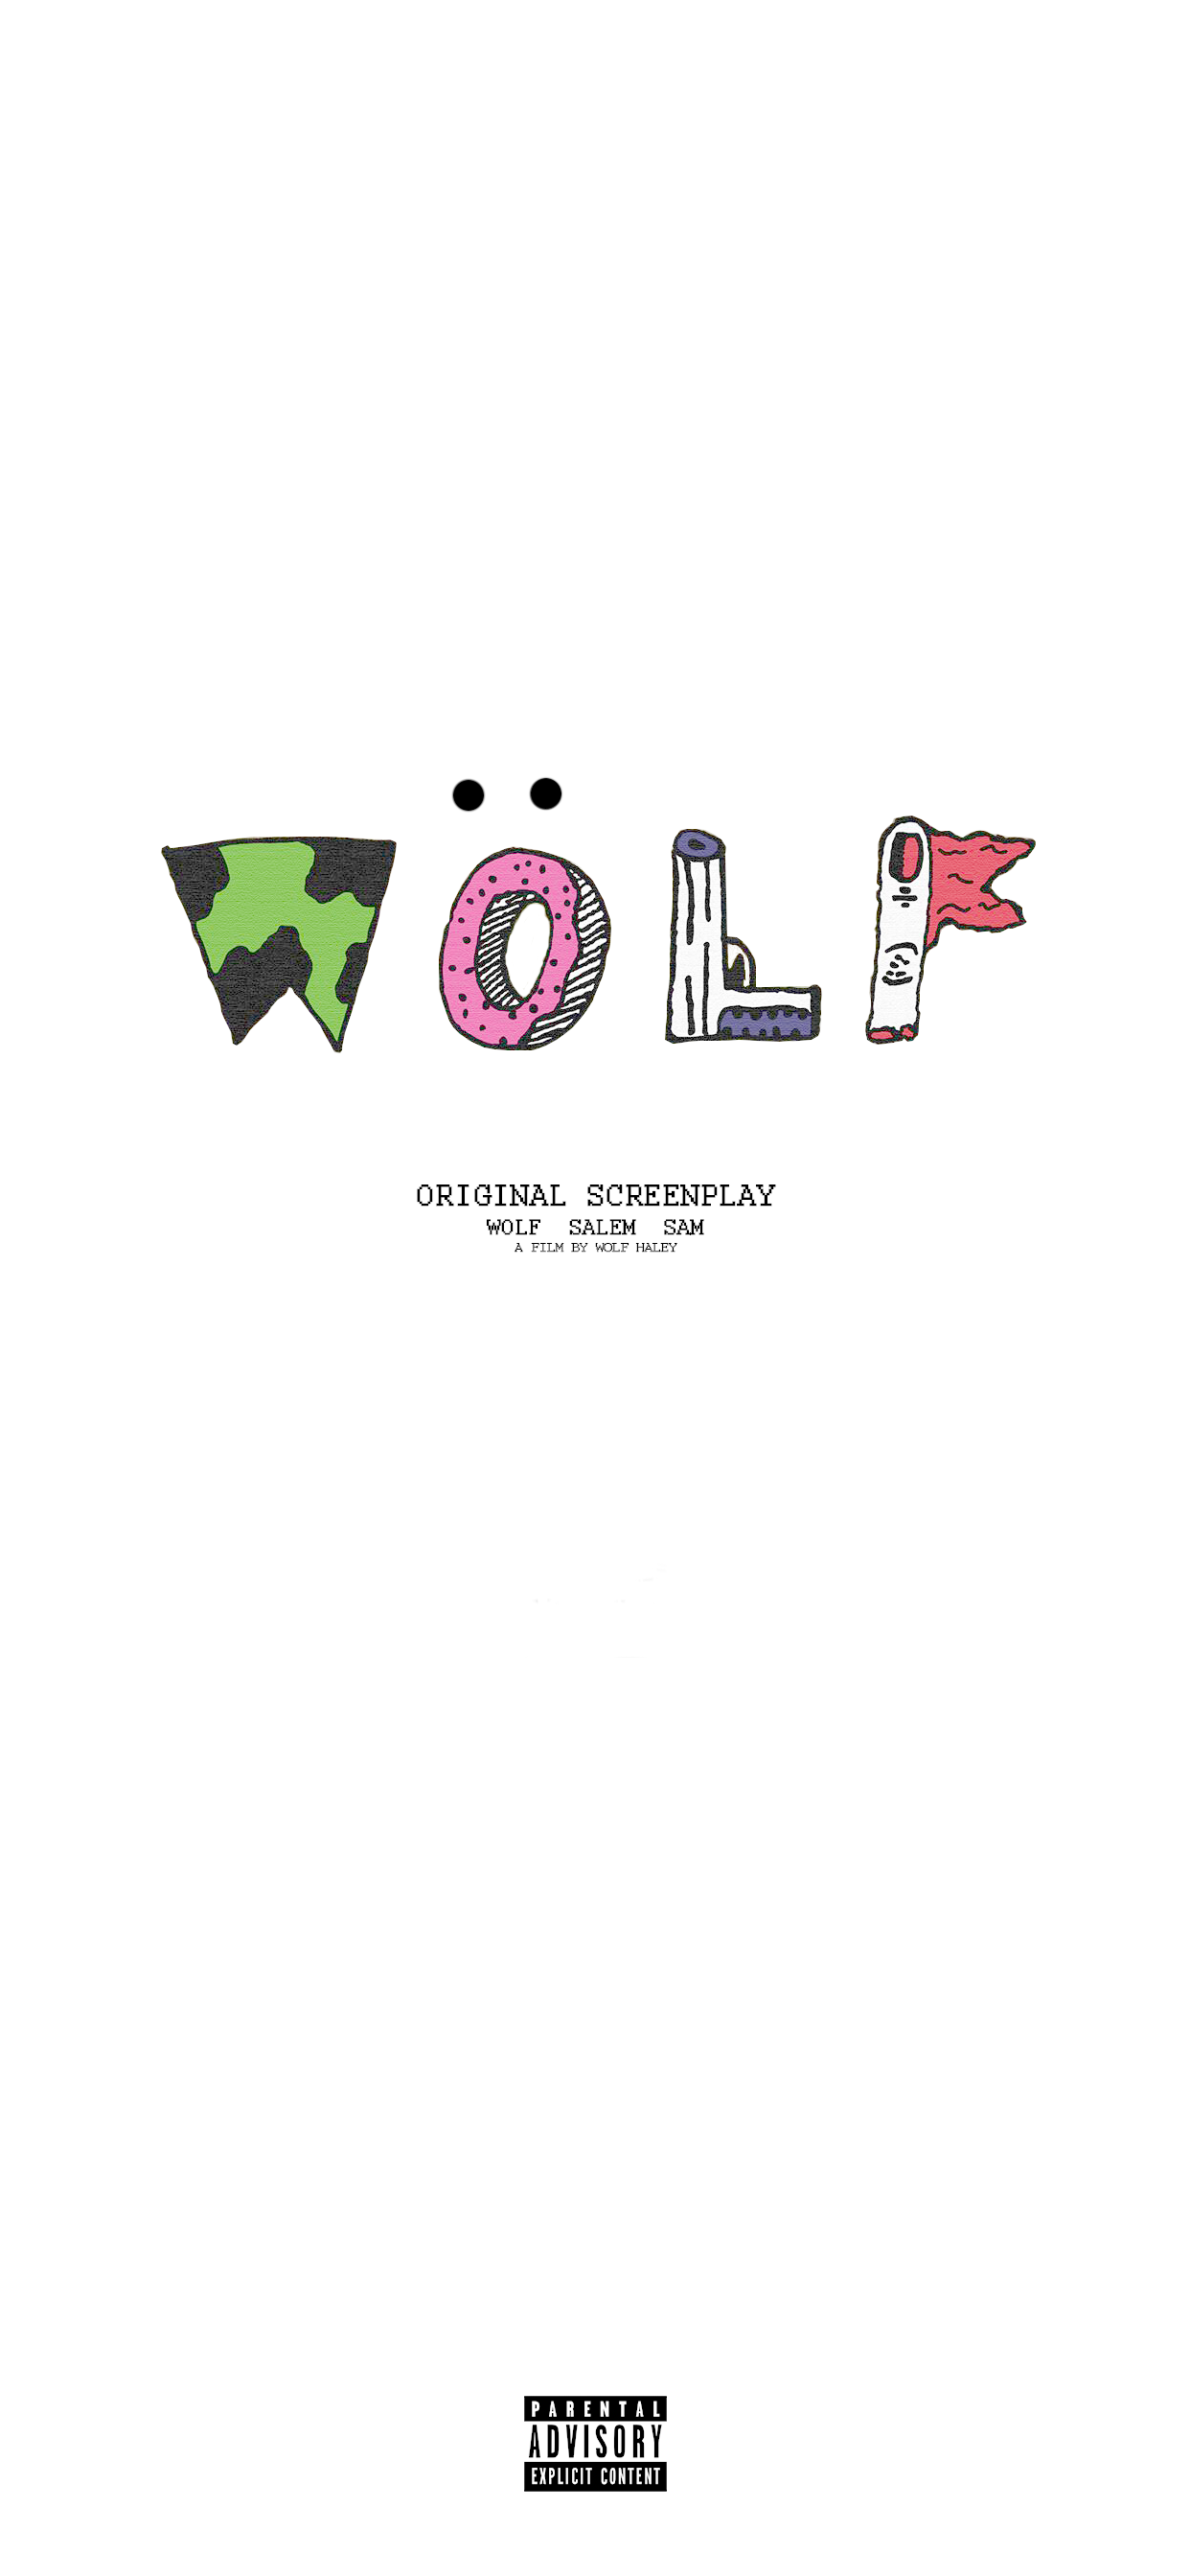 Created a WOLF wallpaper using the Screenplay cover